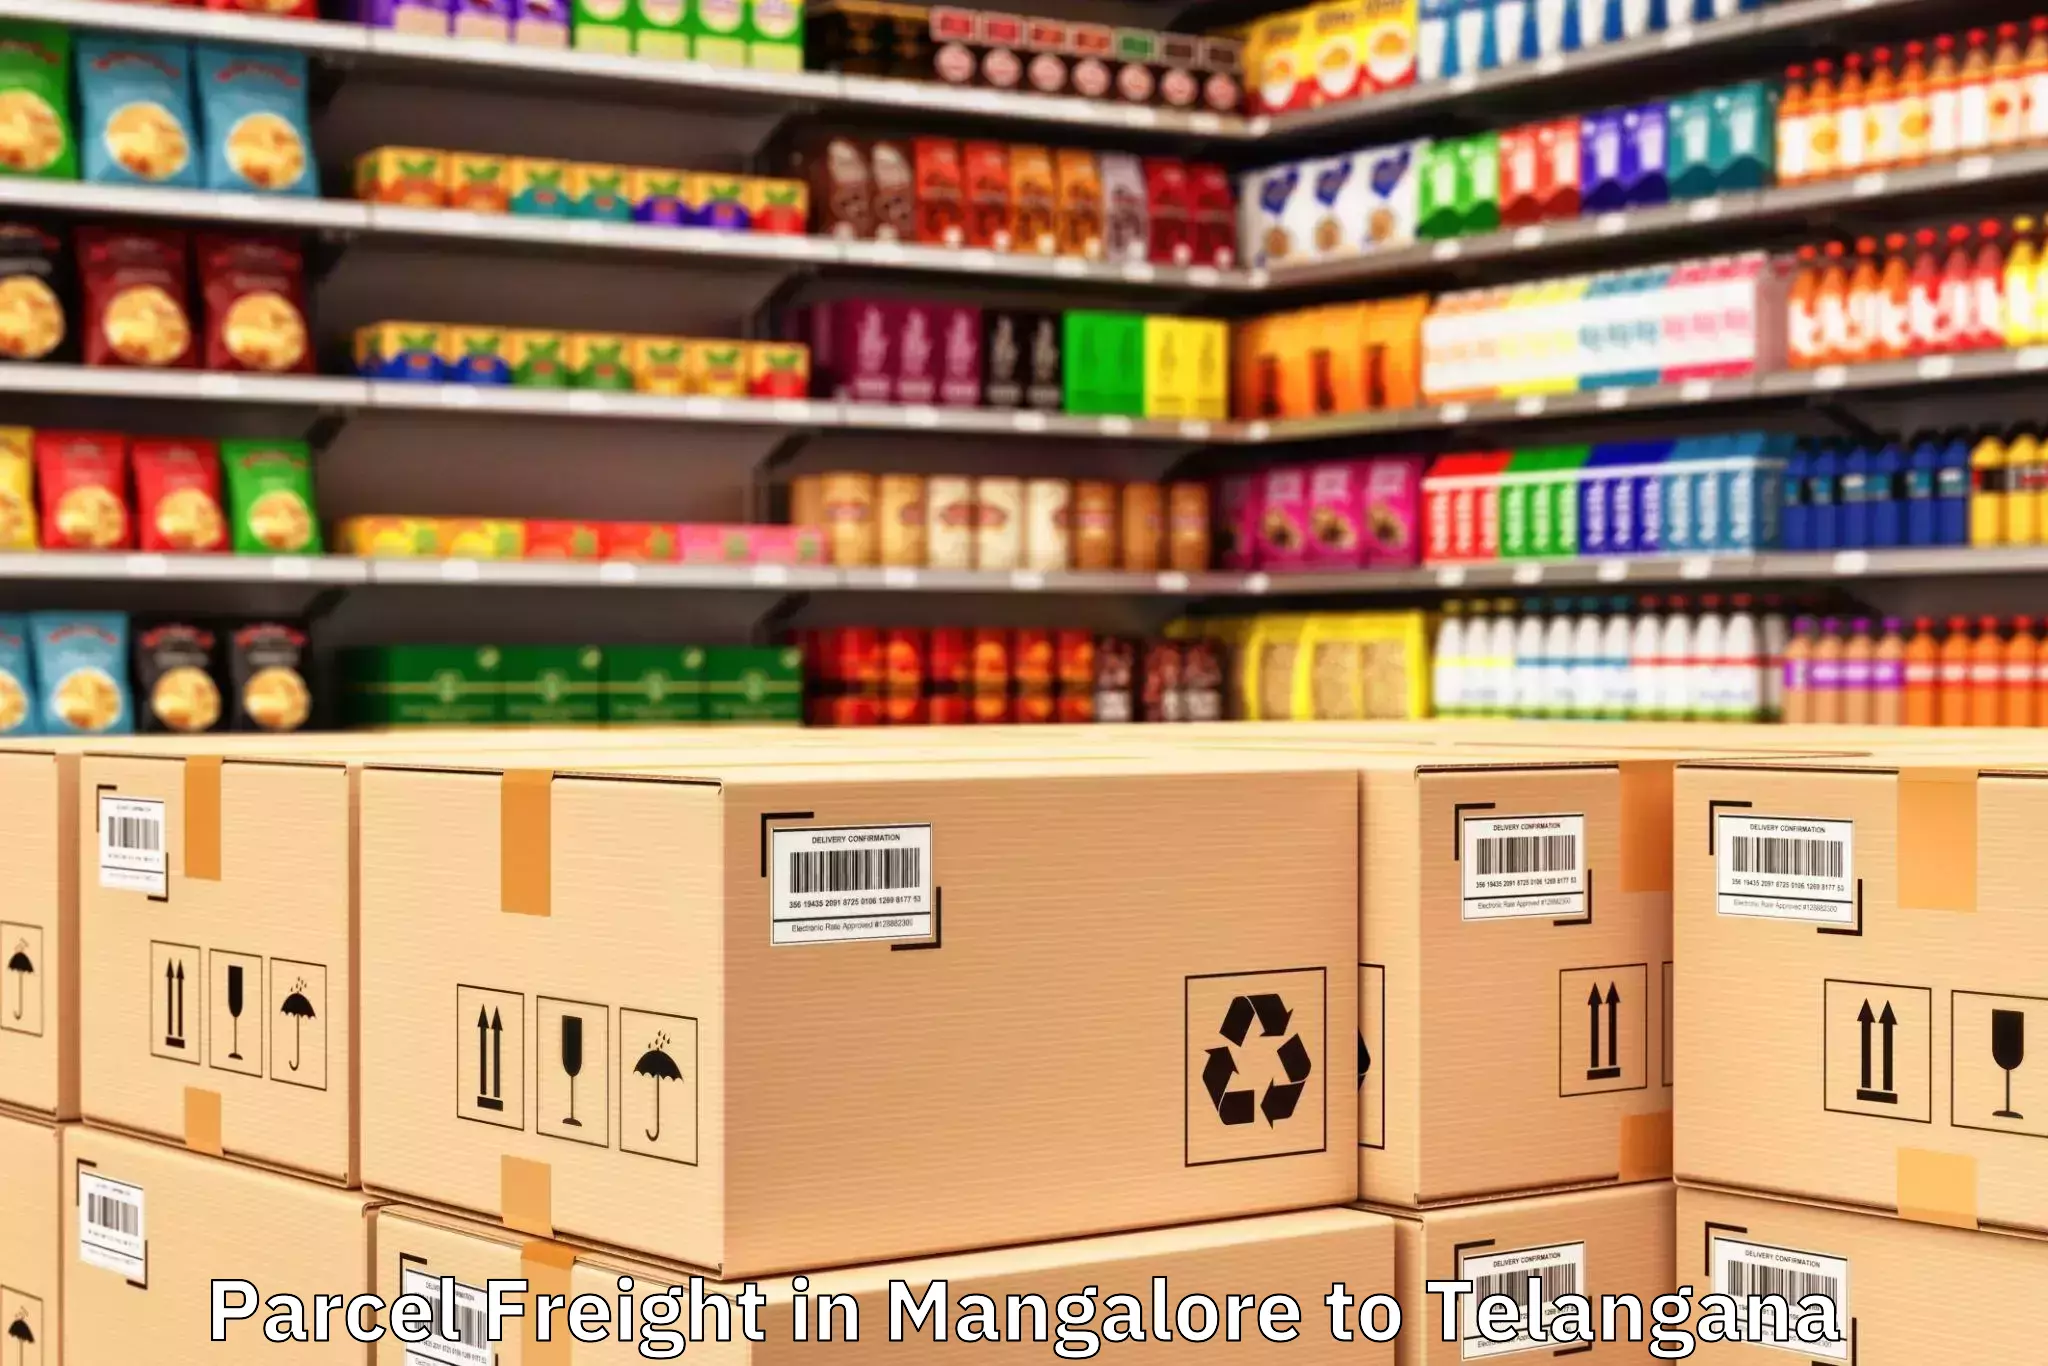 Easy Mangalore to Peddavoora Parcel Freight Booking